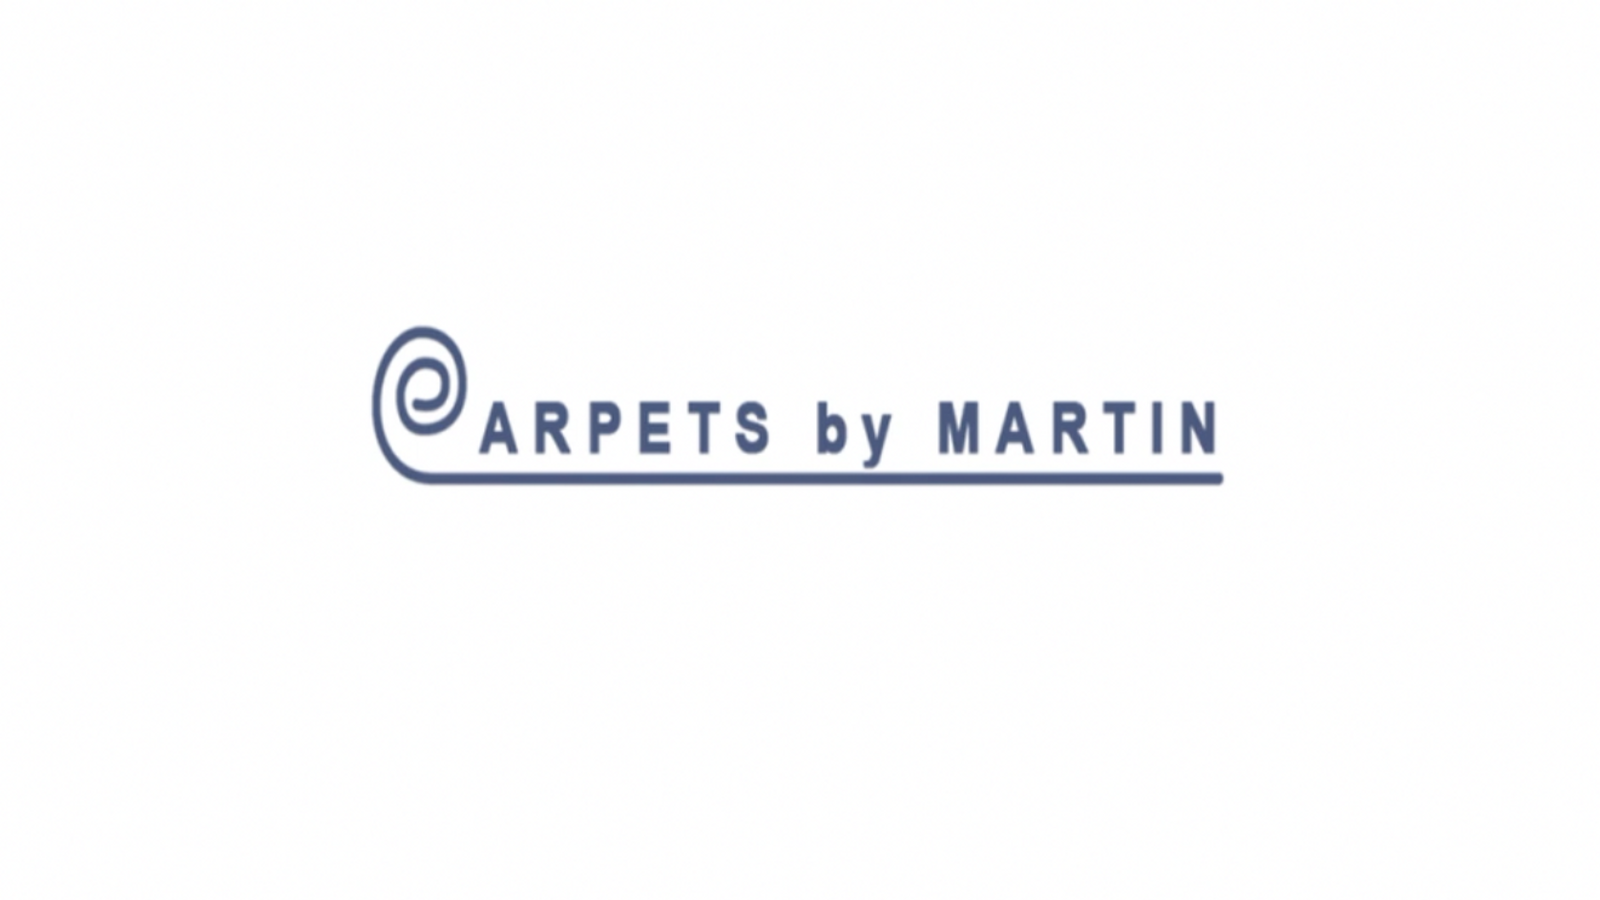 Carpets by Martin